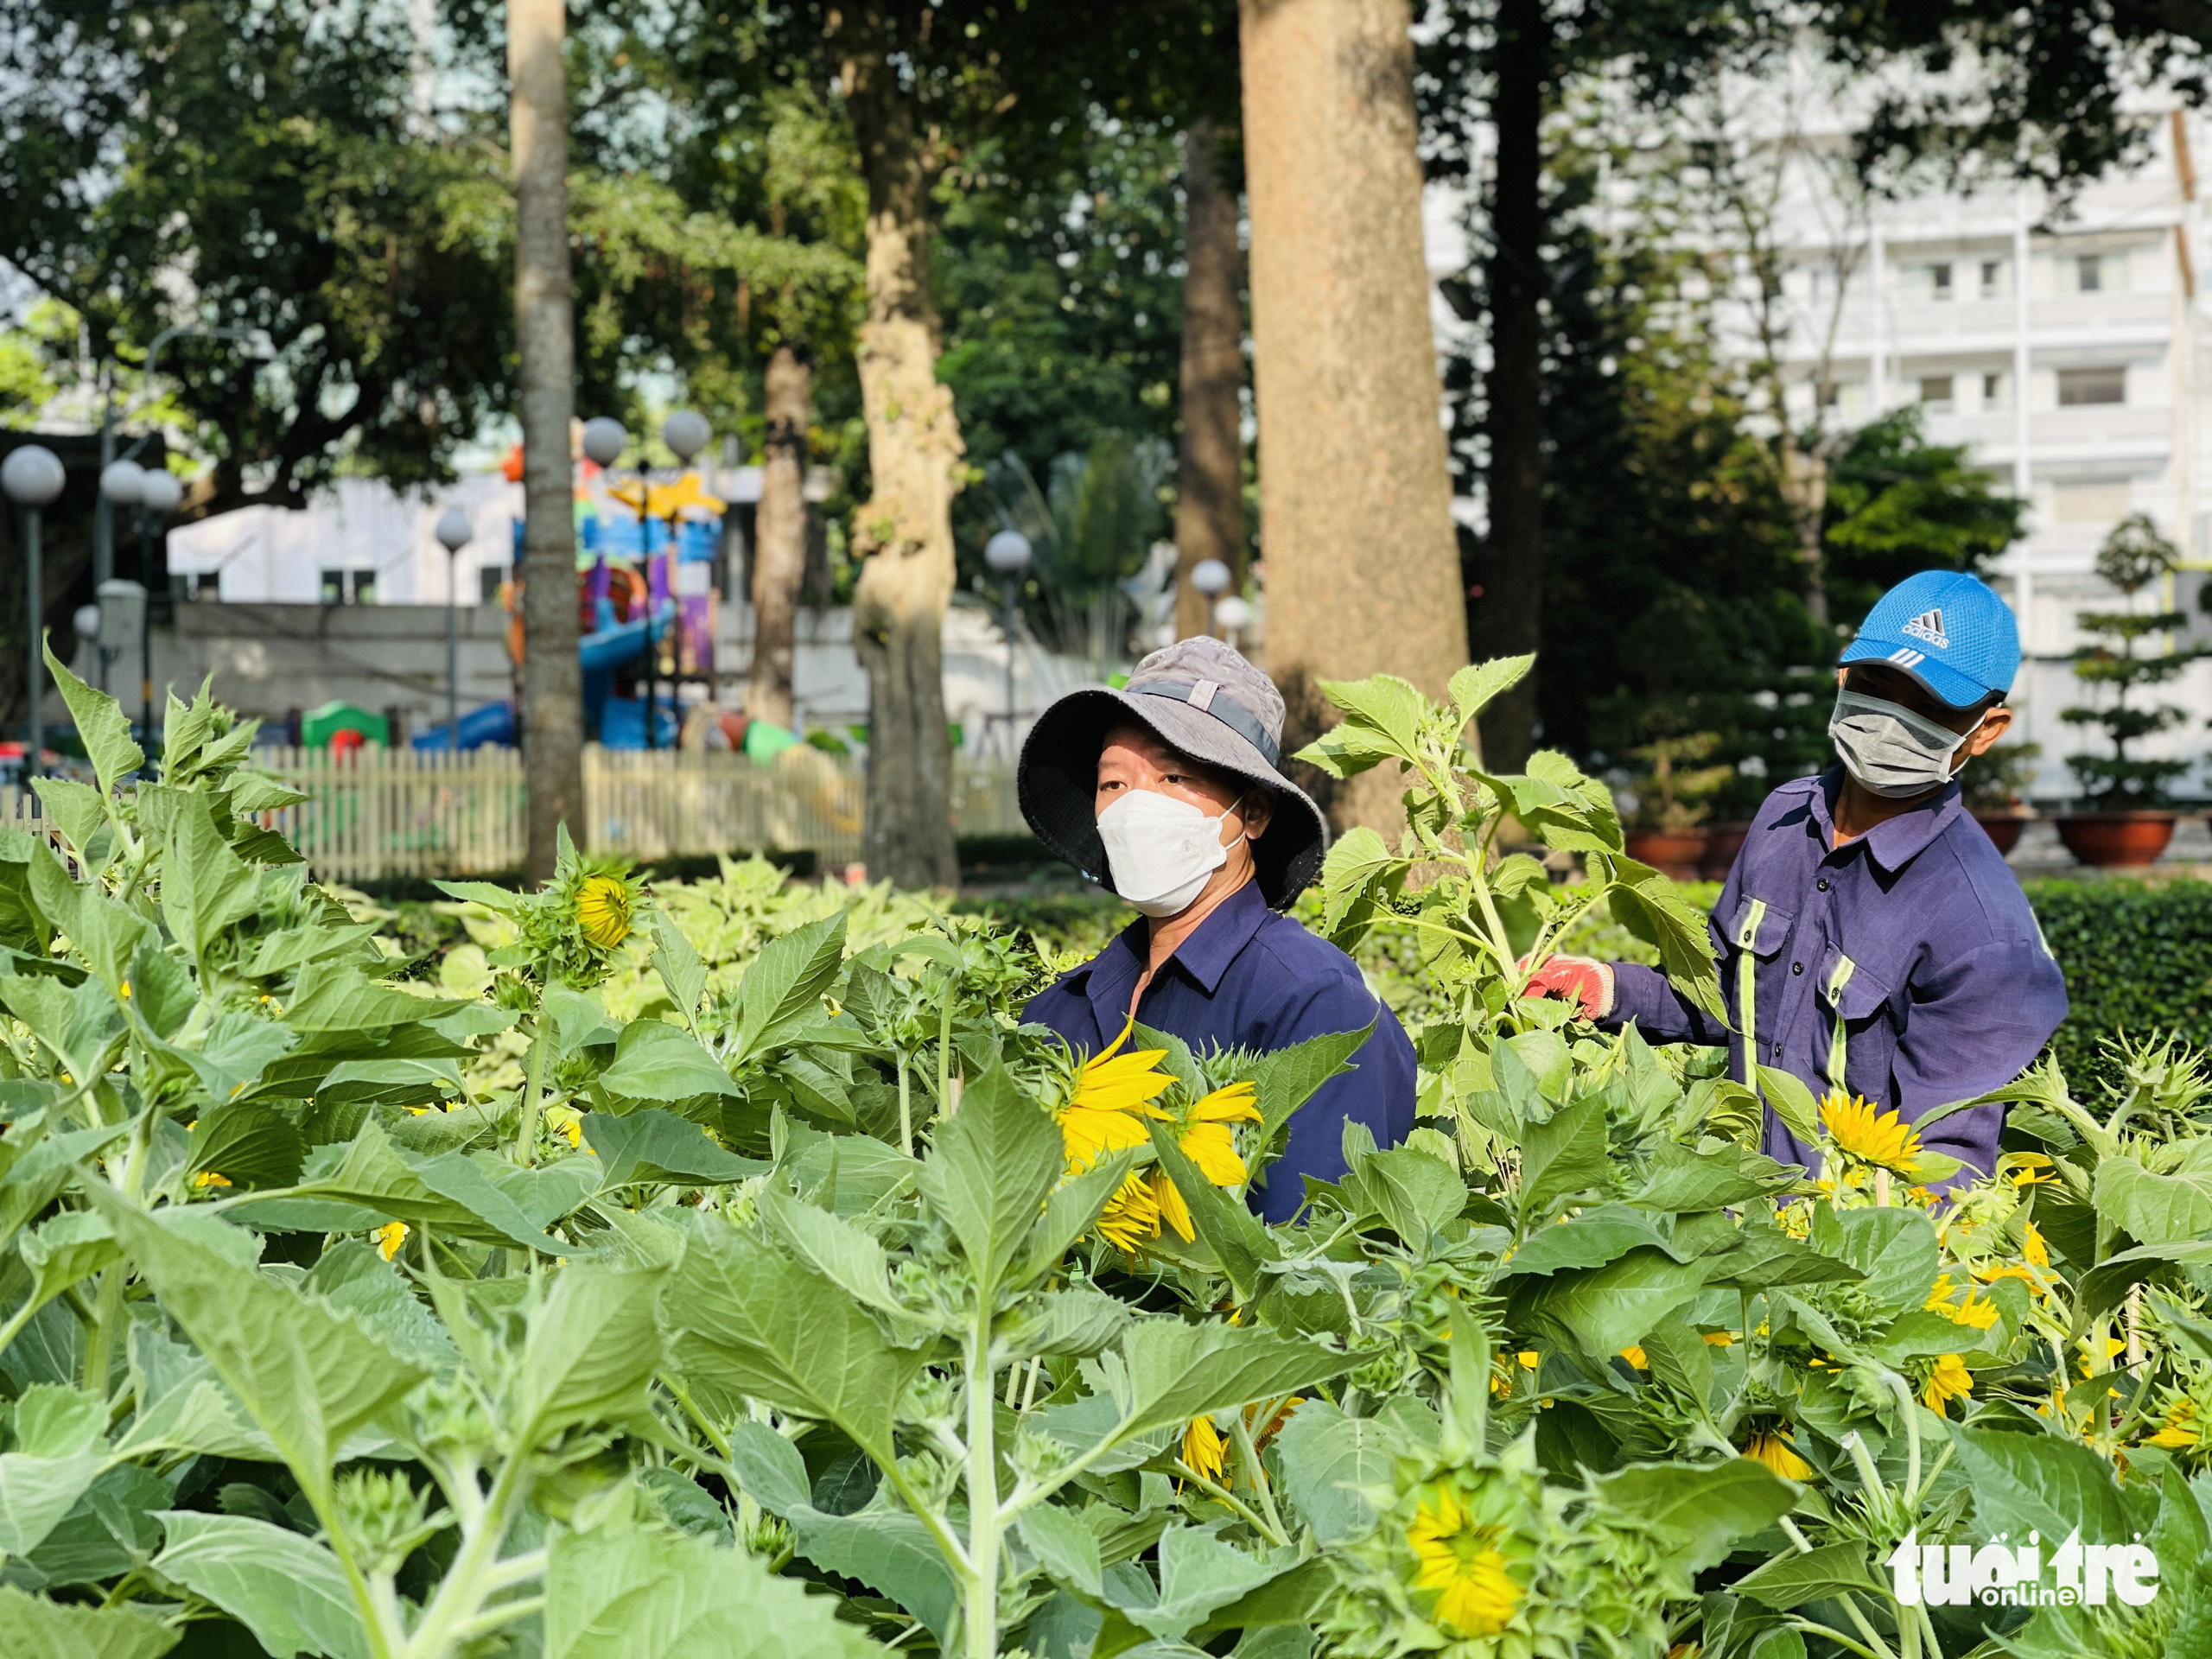 Employees of Ho Chi Minh City Greenery Parks Company add flower pots to an area inside the 2022 Tet Flower Festival at Tao Dan Park in Ho Chi Minh City, January 23, 2022. Photo: Le Phan / Tuoi Tre